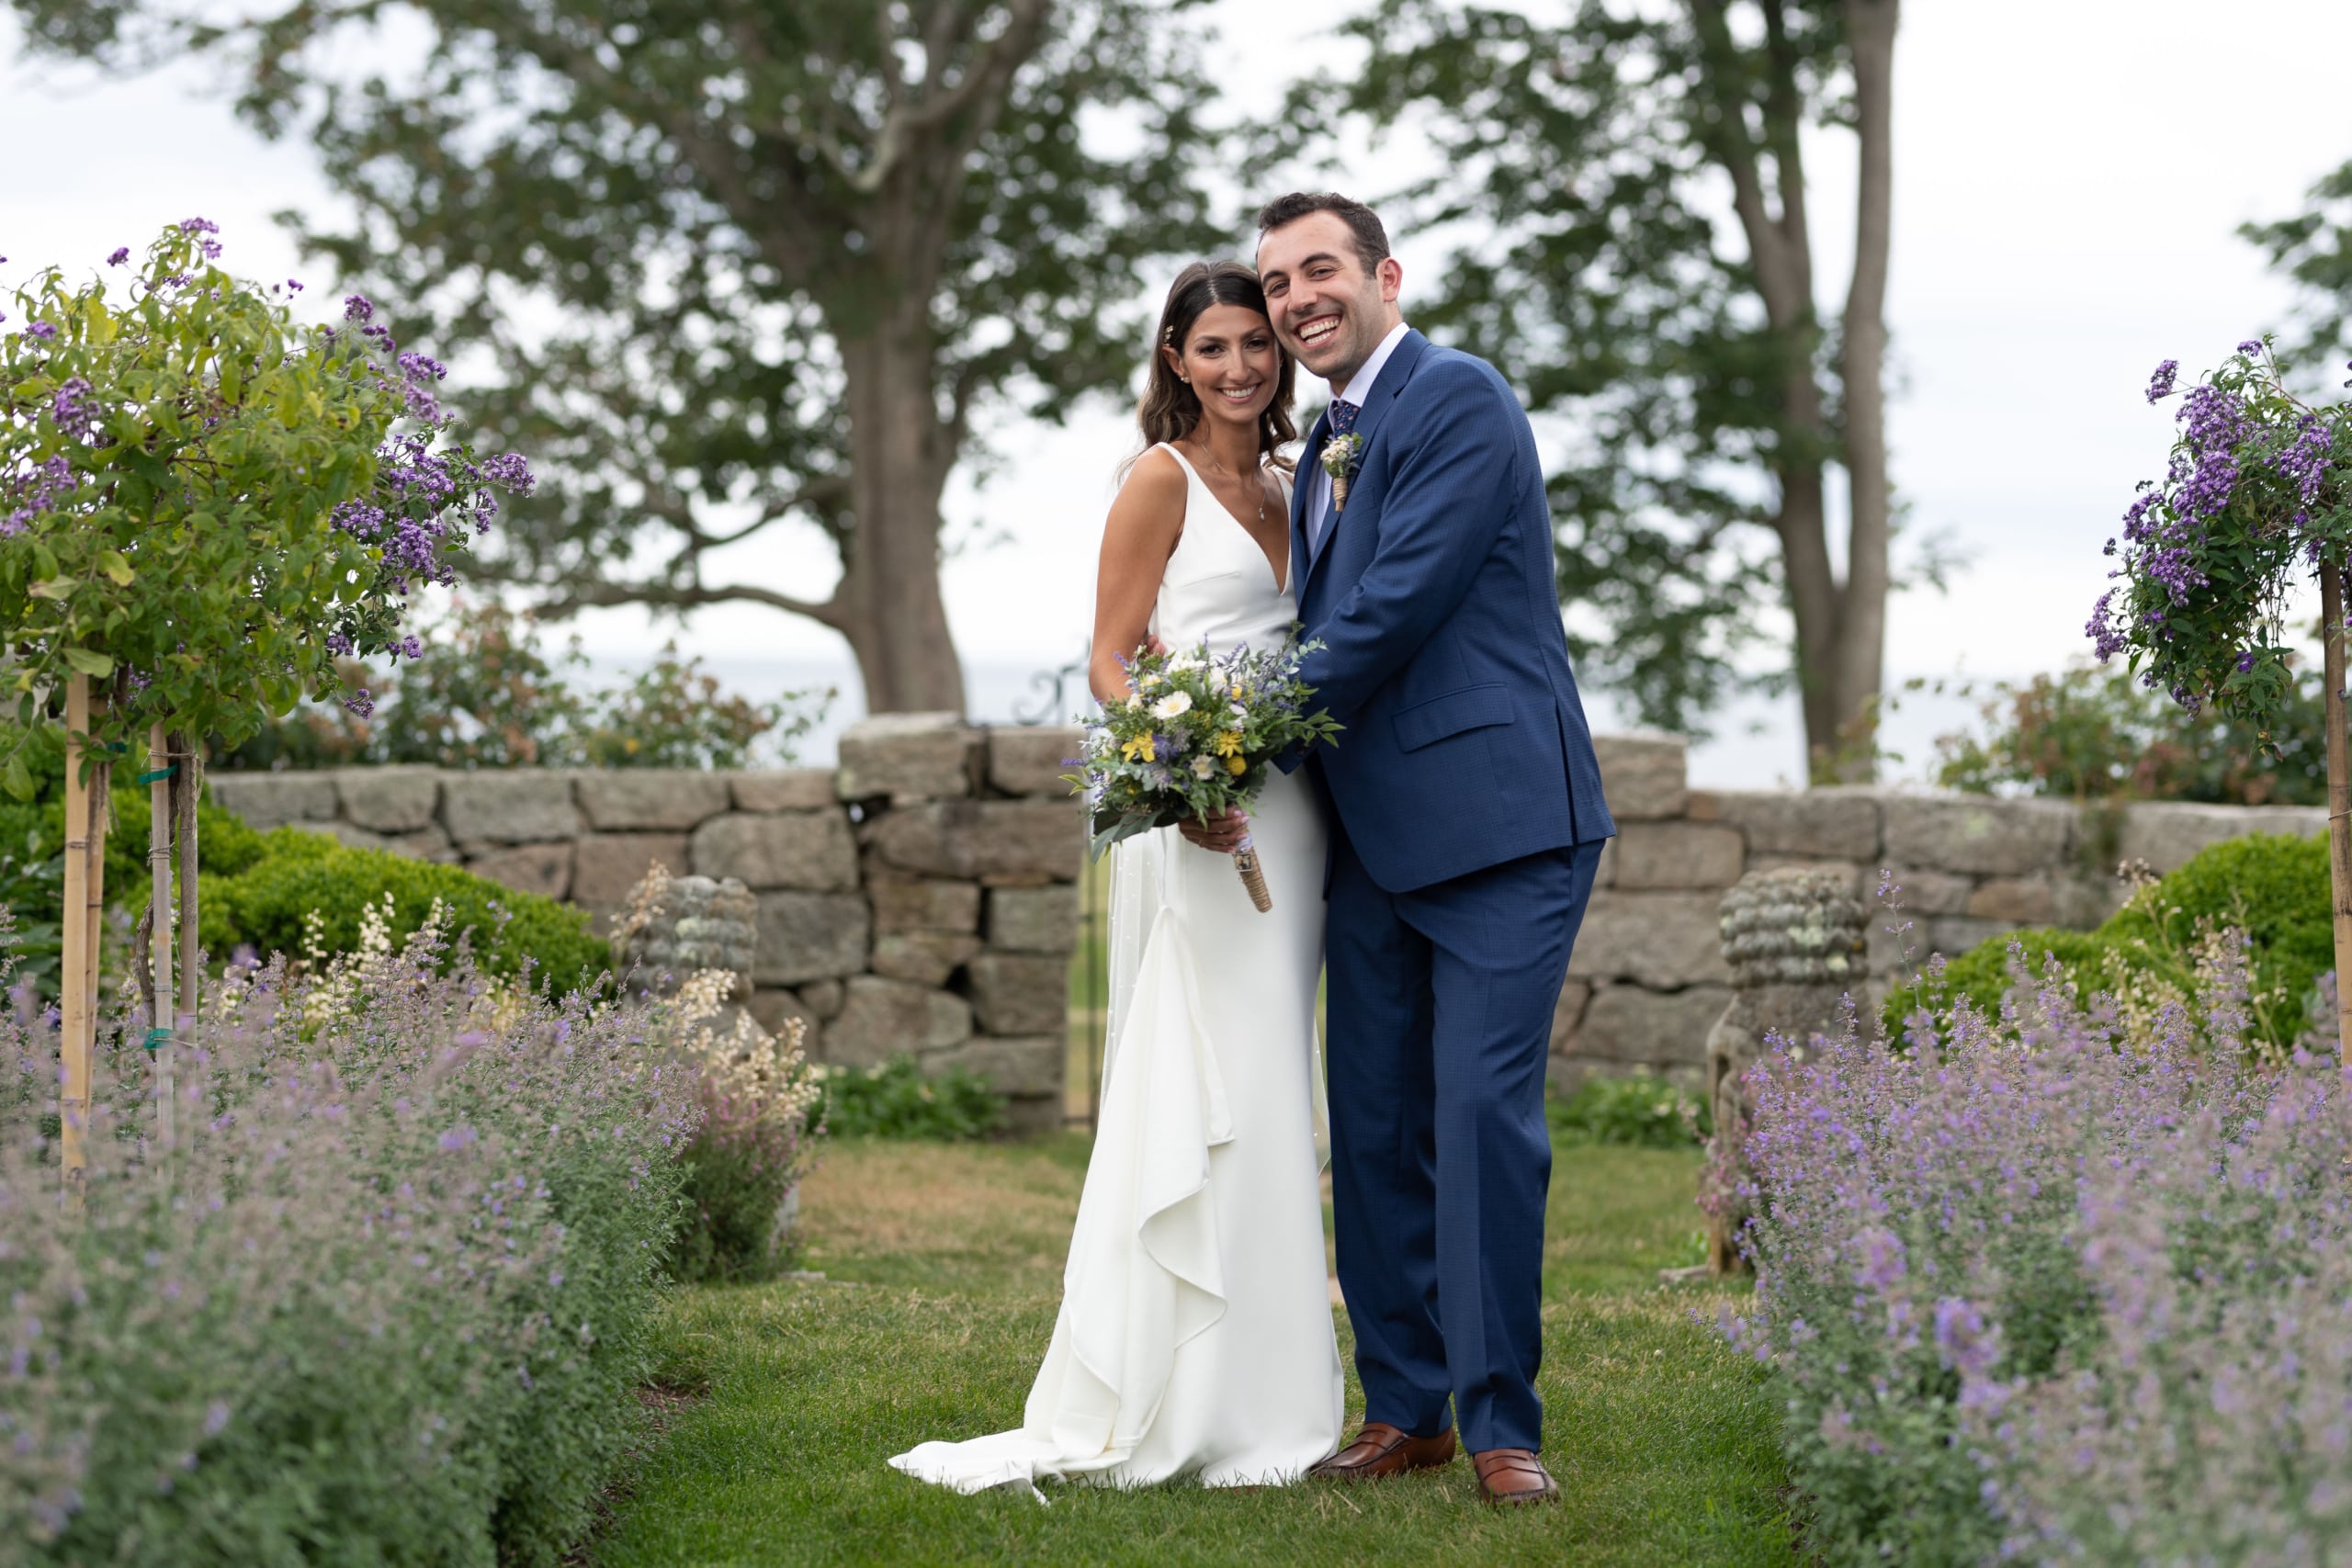 A bride and groom pose together in the garden